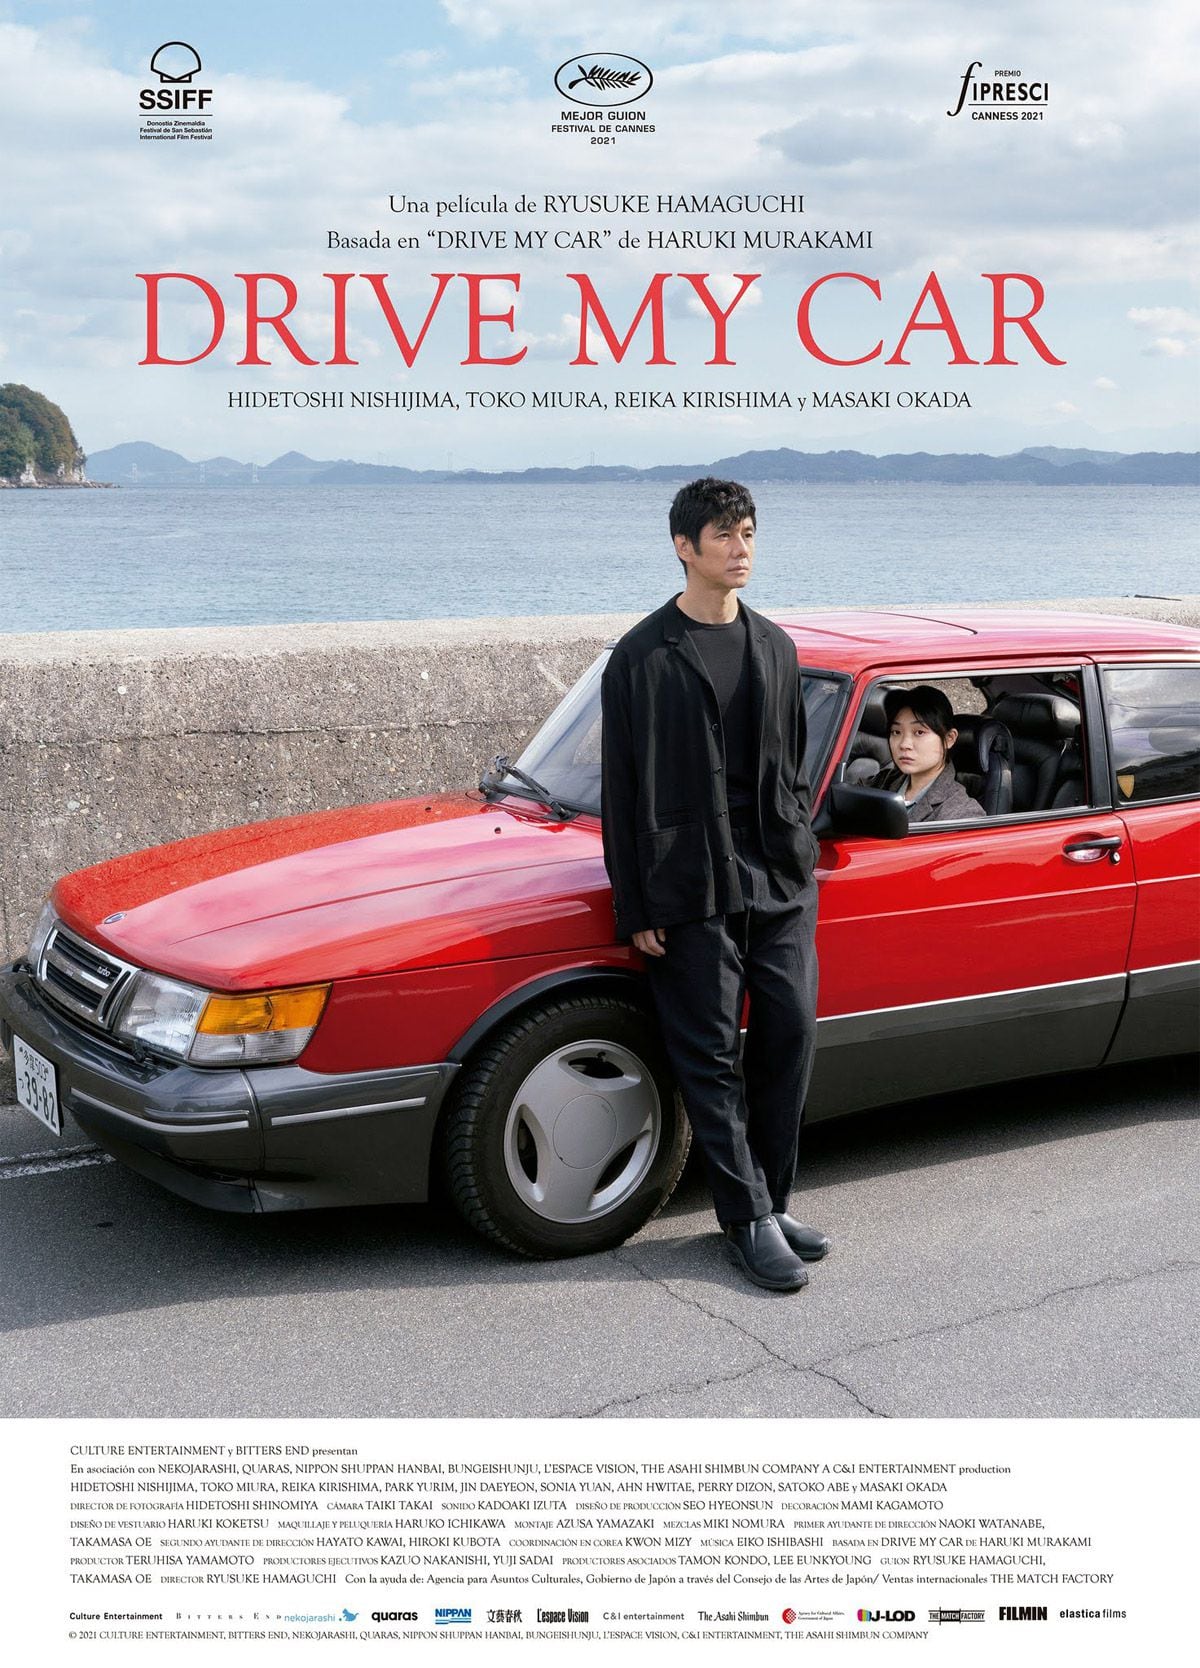 “Drive my car” won the Golden Globe in the category Best Foreign Language Film.